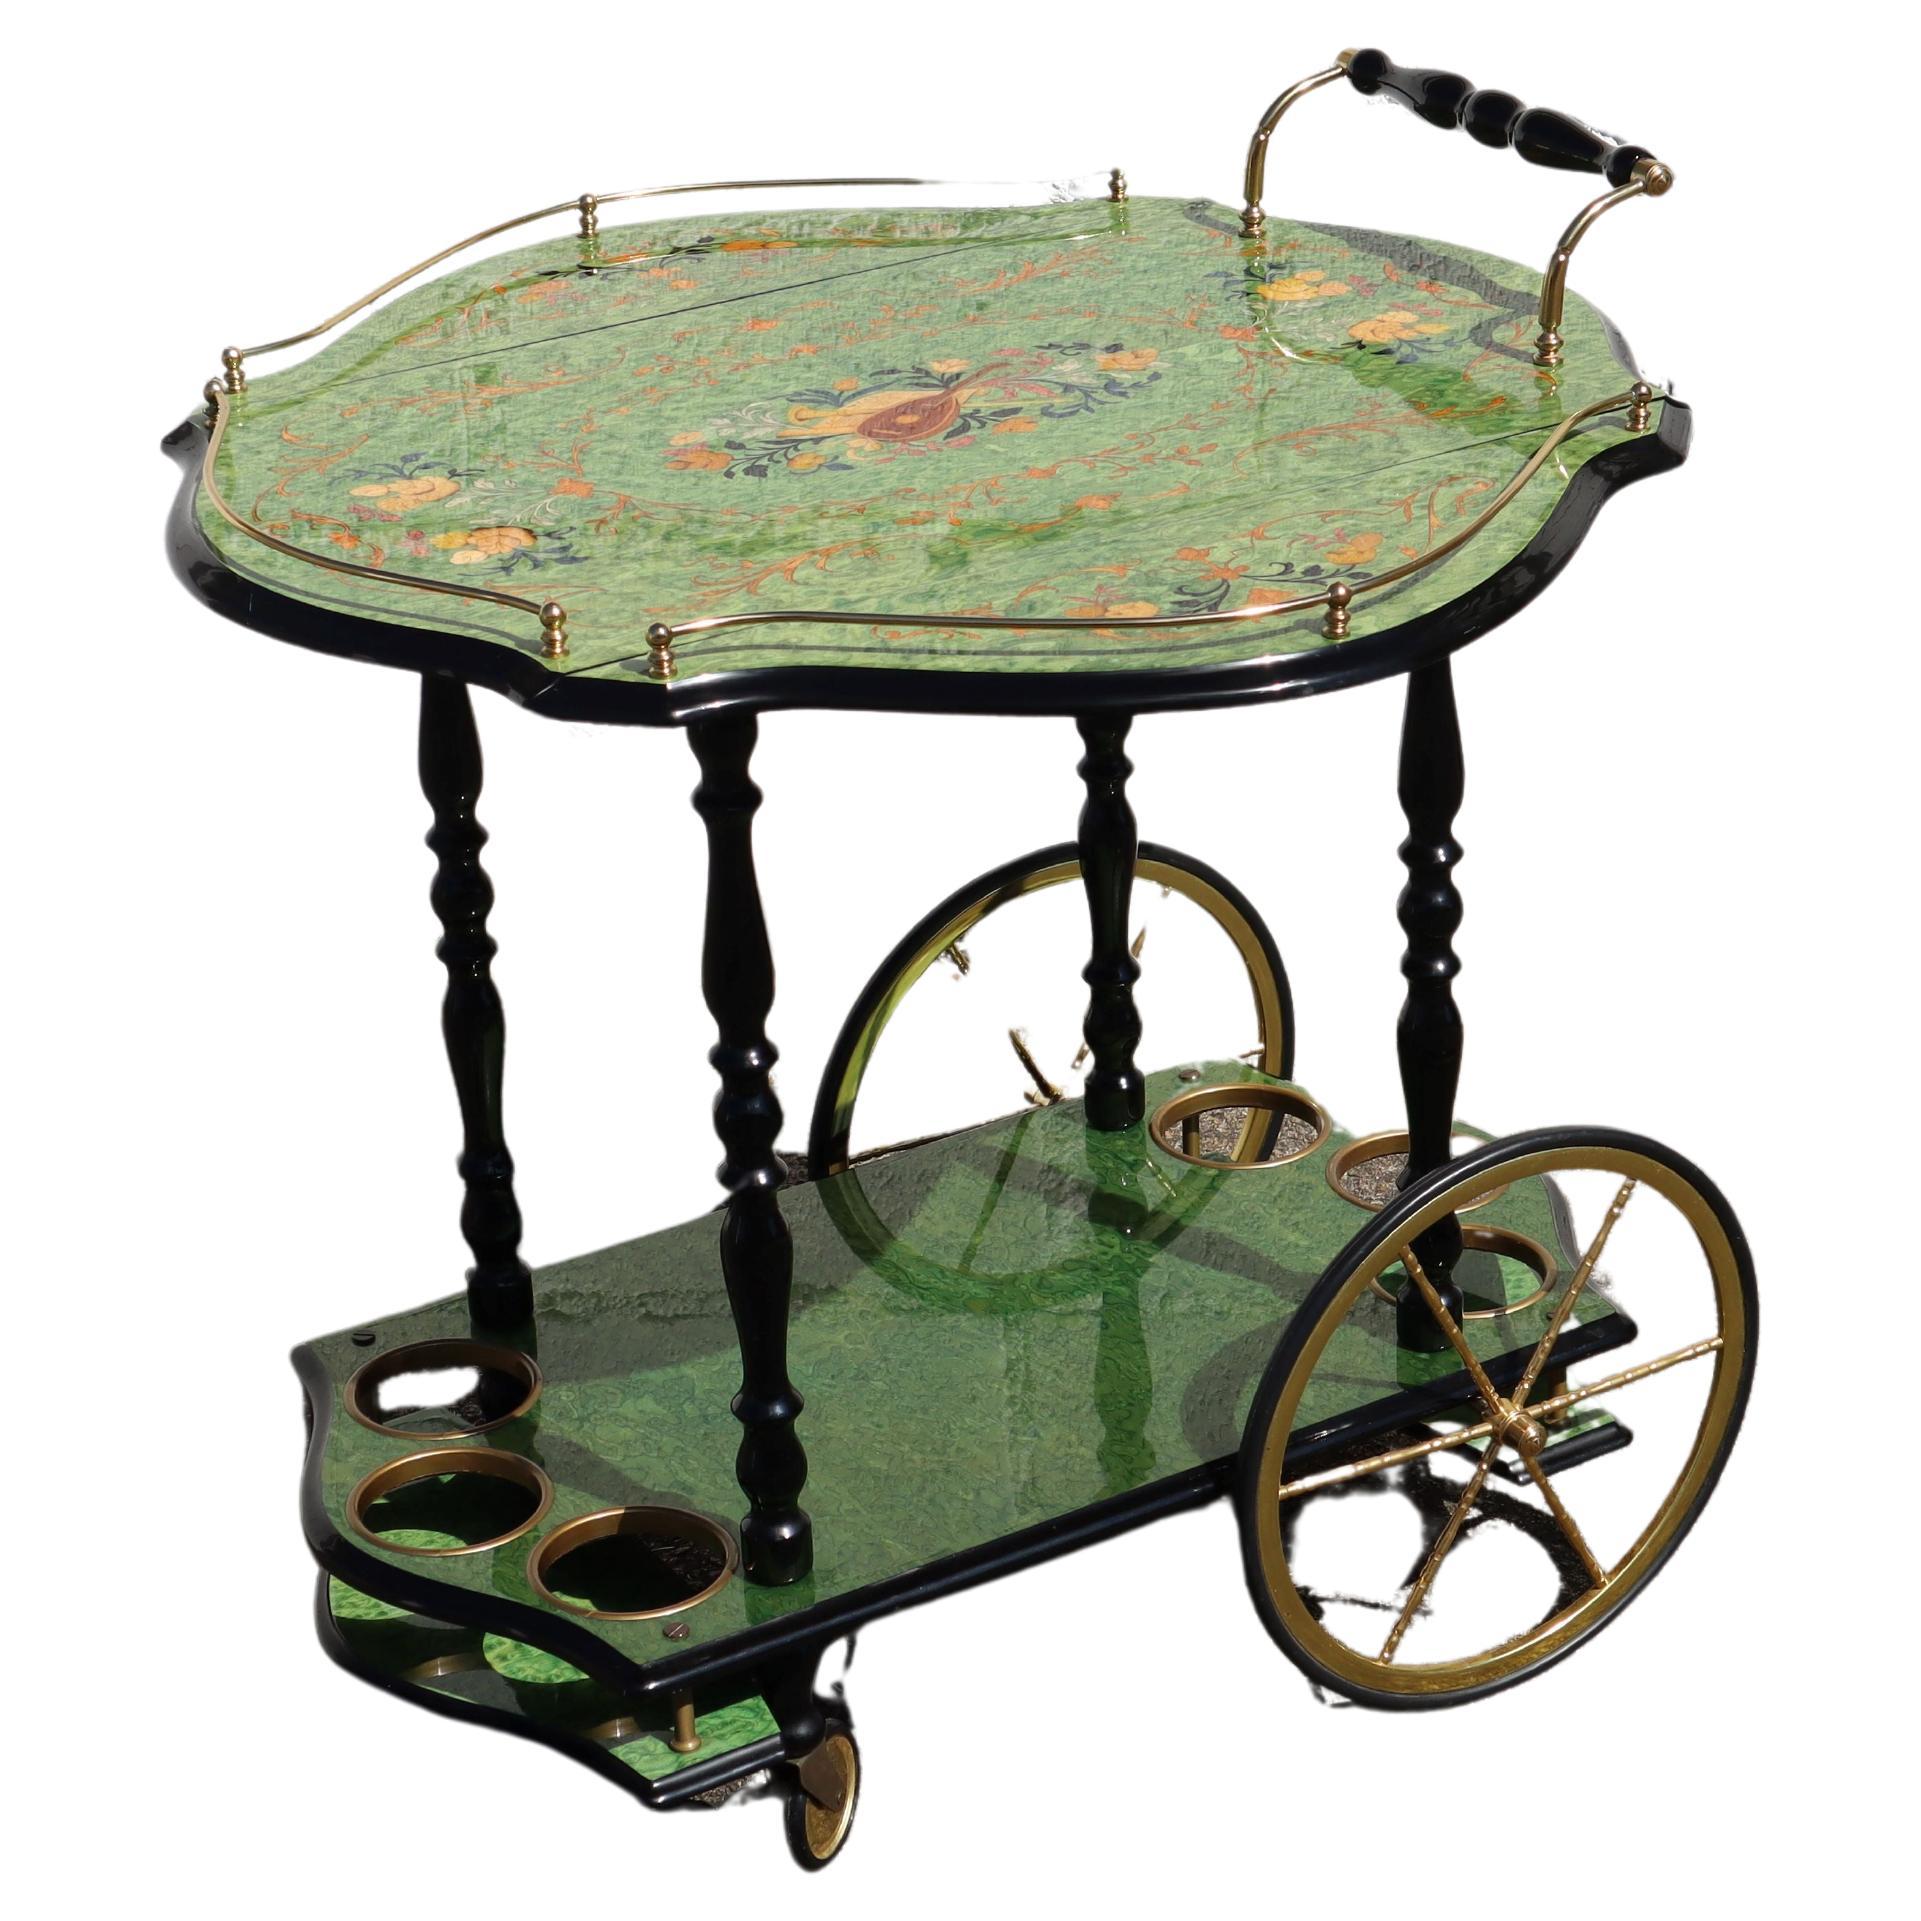 Italian Marquetry Two Tier Drop Leaf Bar Cart-Vintage emerald green Dessert-Bar Cart Neoclassical Style
Magnificent Intarsia Work and elaborately hand-painted Surface of the Table Top on an emerald green Background.
The Serving Platter is surrounded